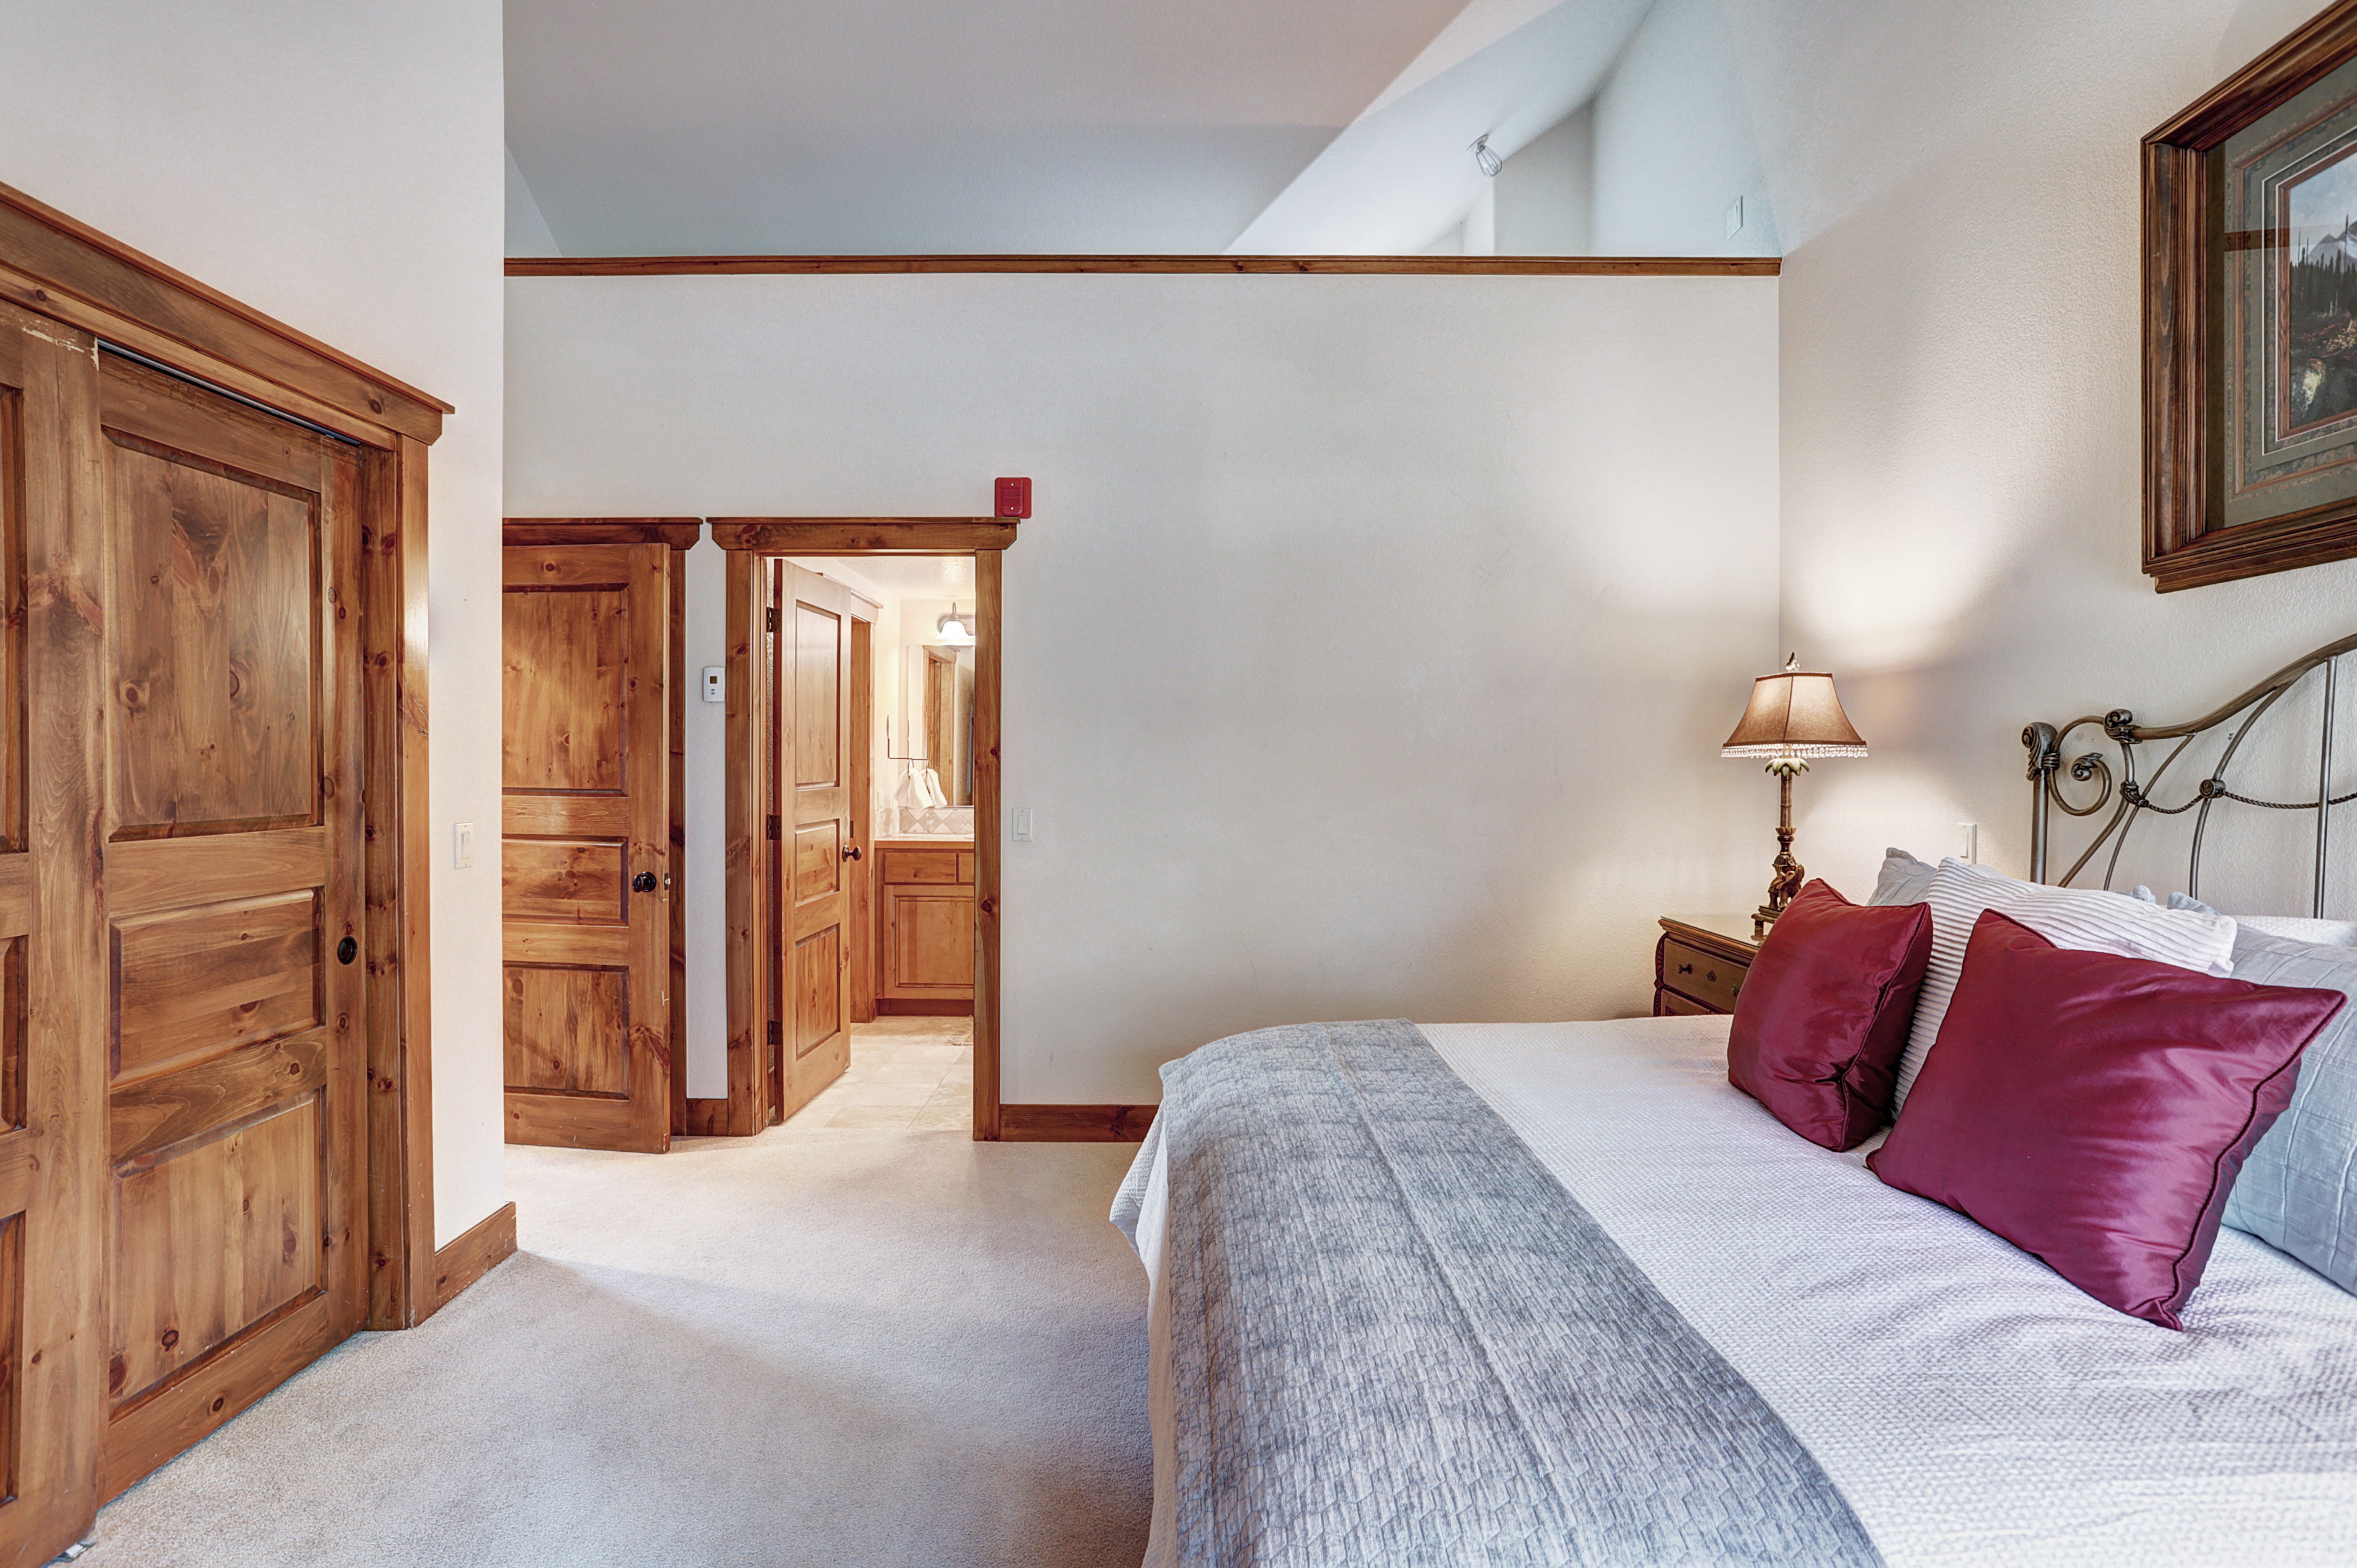 This master bedroom offers ample closet space and a private ensuite bathroom - Amber Sky Breckenridge Vacation Rental